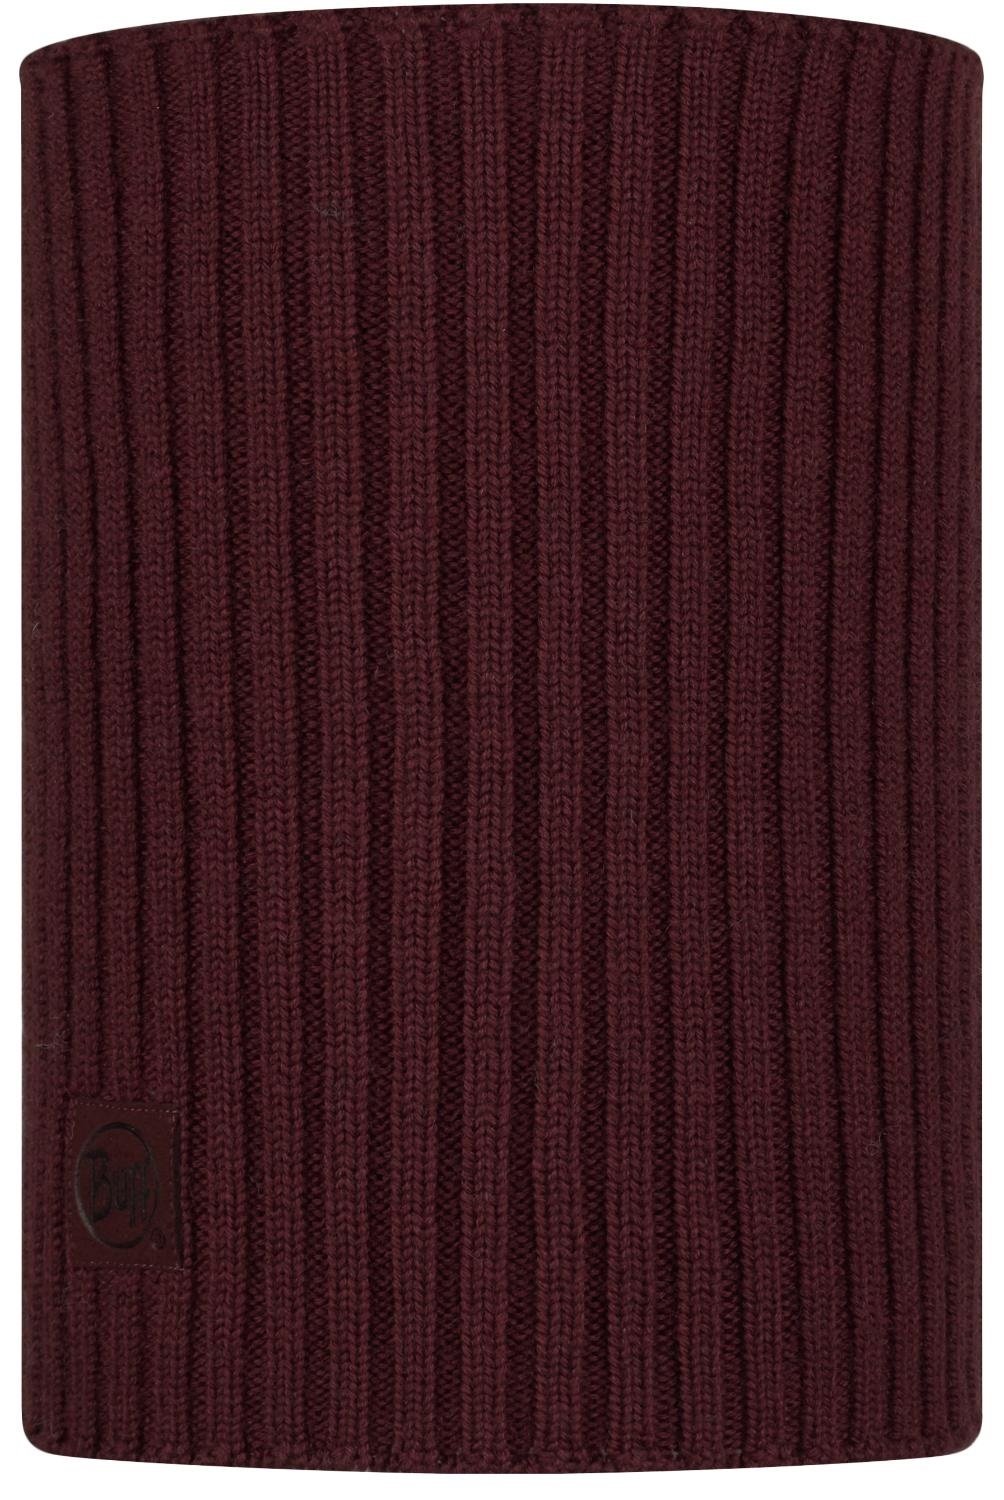 фото Шарф buff knitted neckwarmer comfort norval maroon, us:one size, 124244.632.10.00